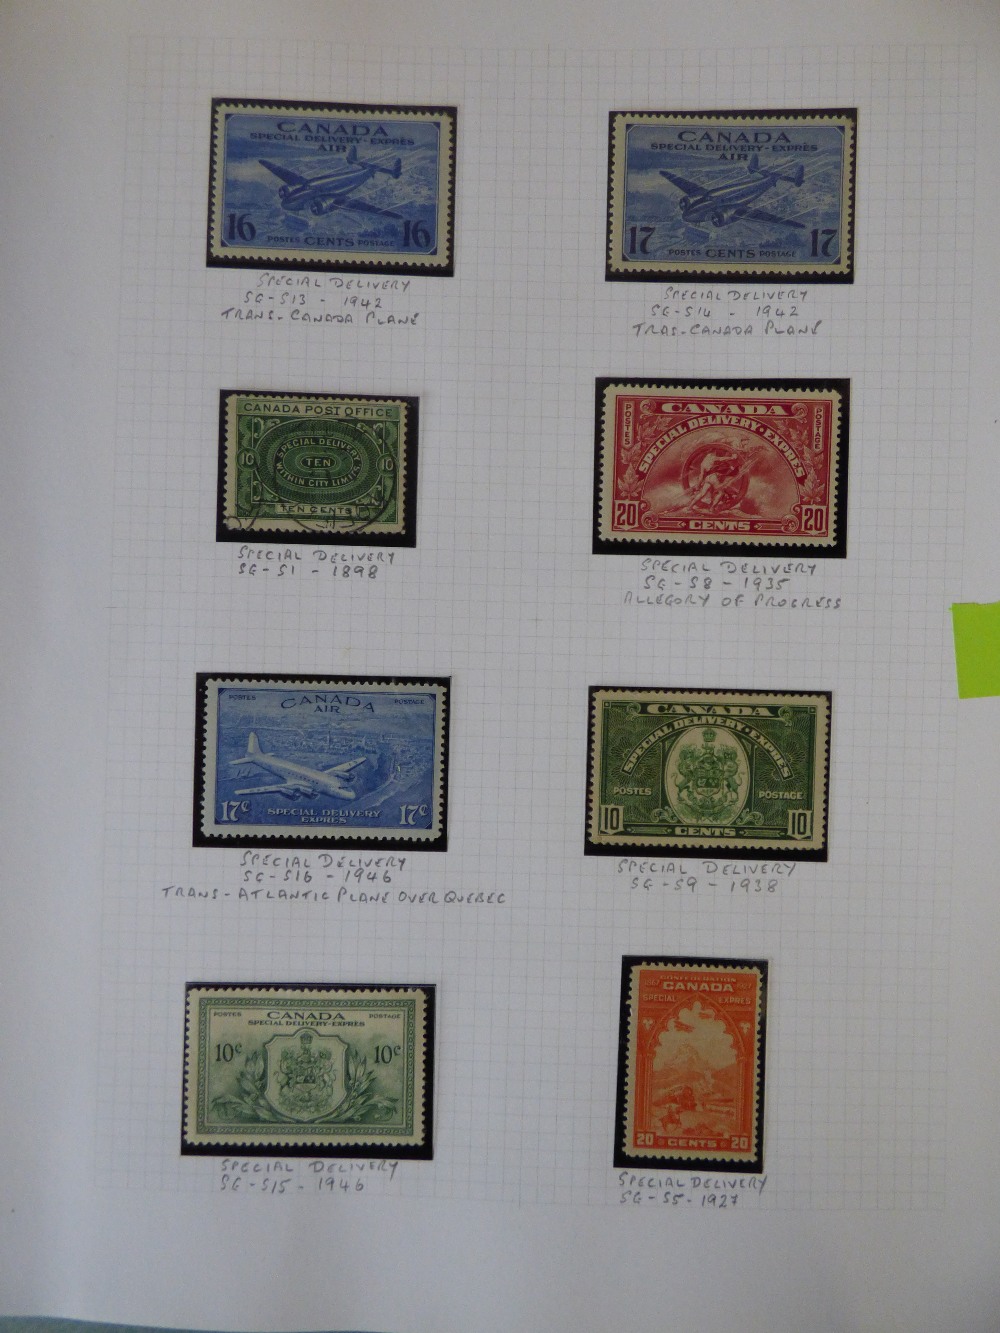 Canada States & Dominican stamps 1861 & Special Delivery PLEASE always check condition PRIOR to - Image 4 of 4